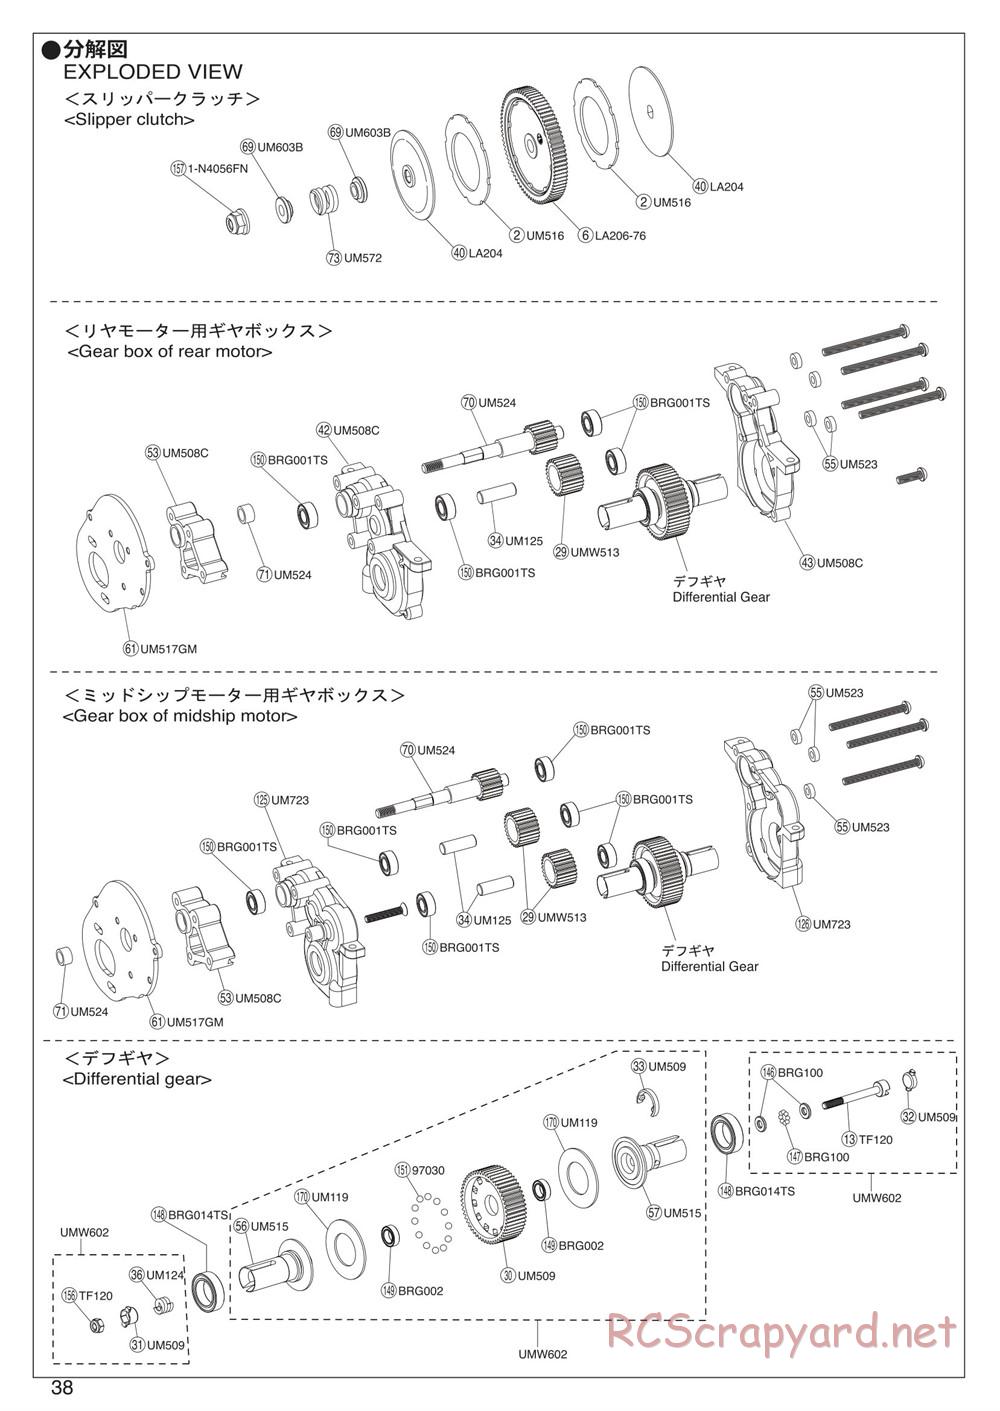 Kyosho - Ultima RB6 - Manual - Page 36